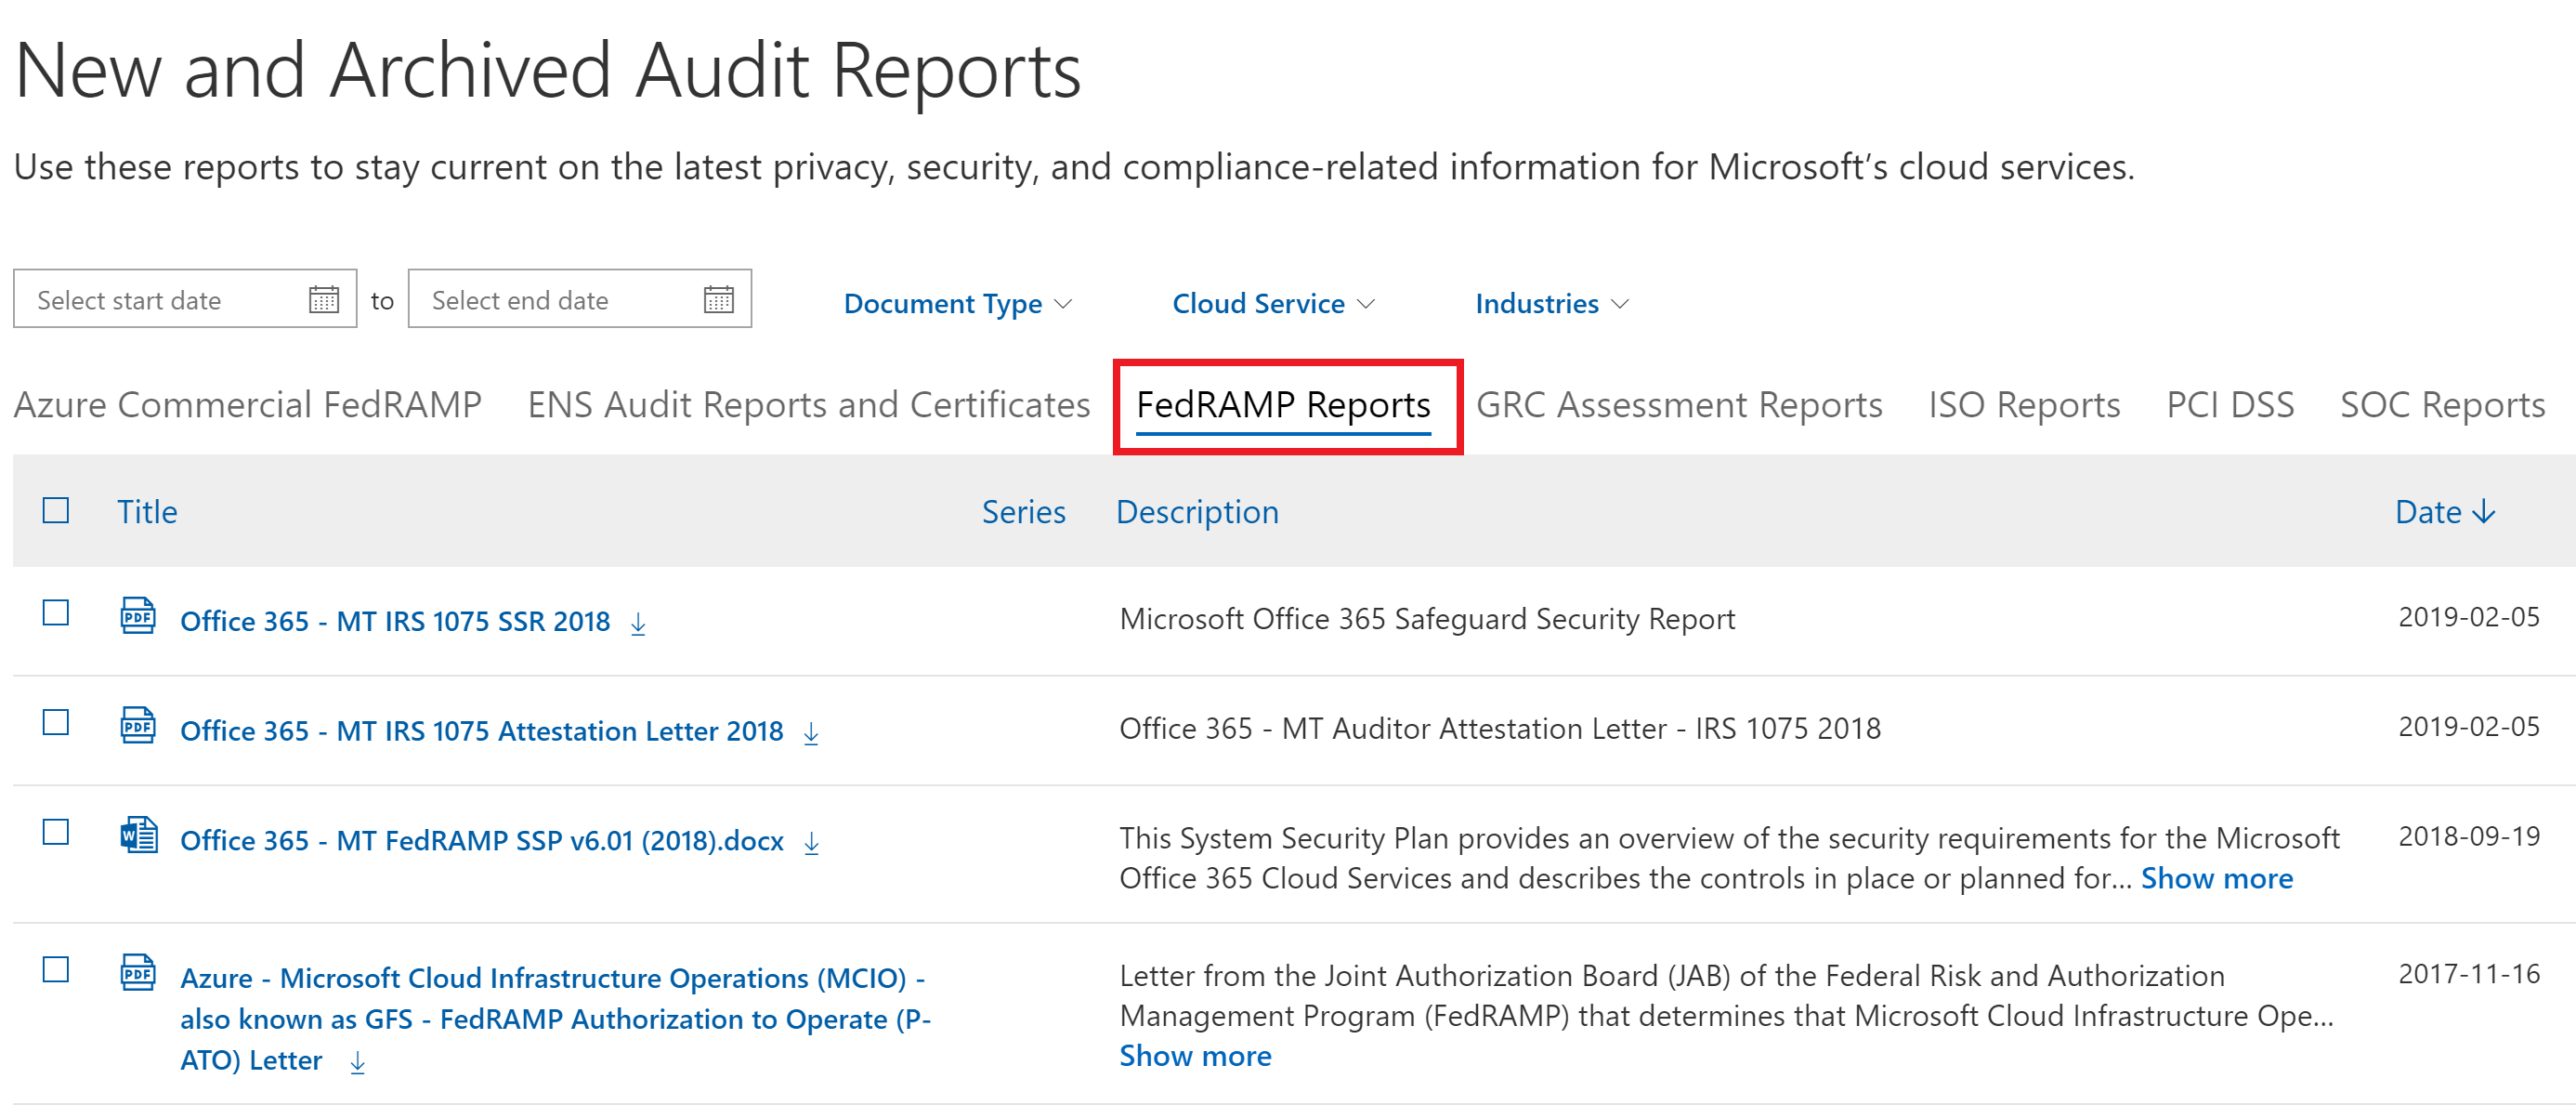 The FedRAMP Reports report type is highlighted on the Data Protection Standards and Regulatory Compliance Reports page, and Azure - FedRAMP Moderate System Security Plan v3.02 is highlighted at the bottom.